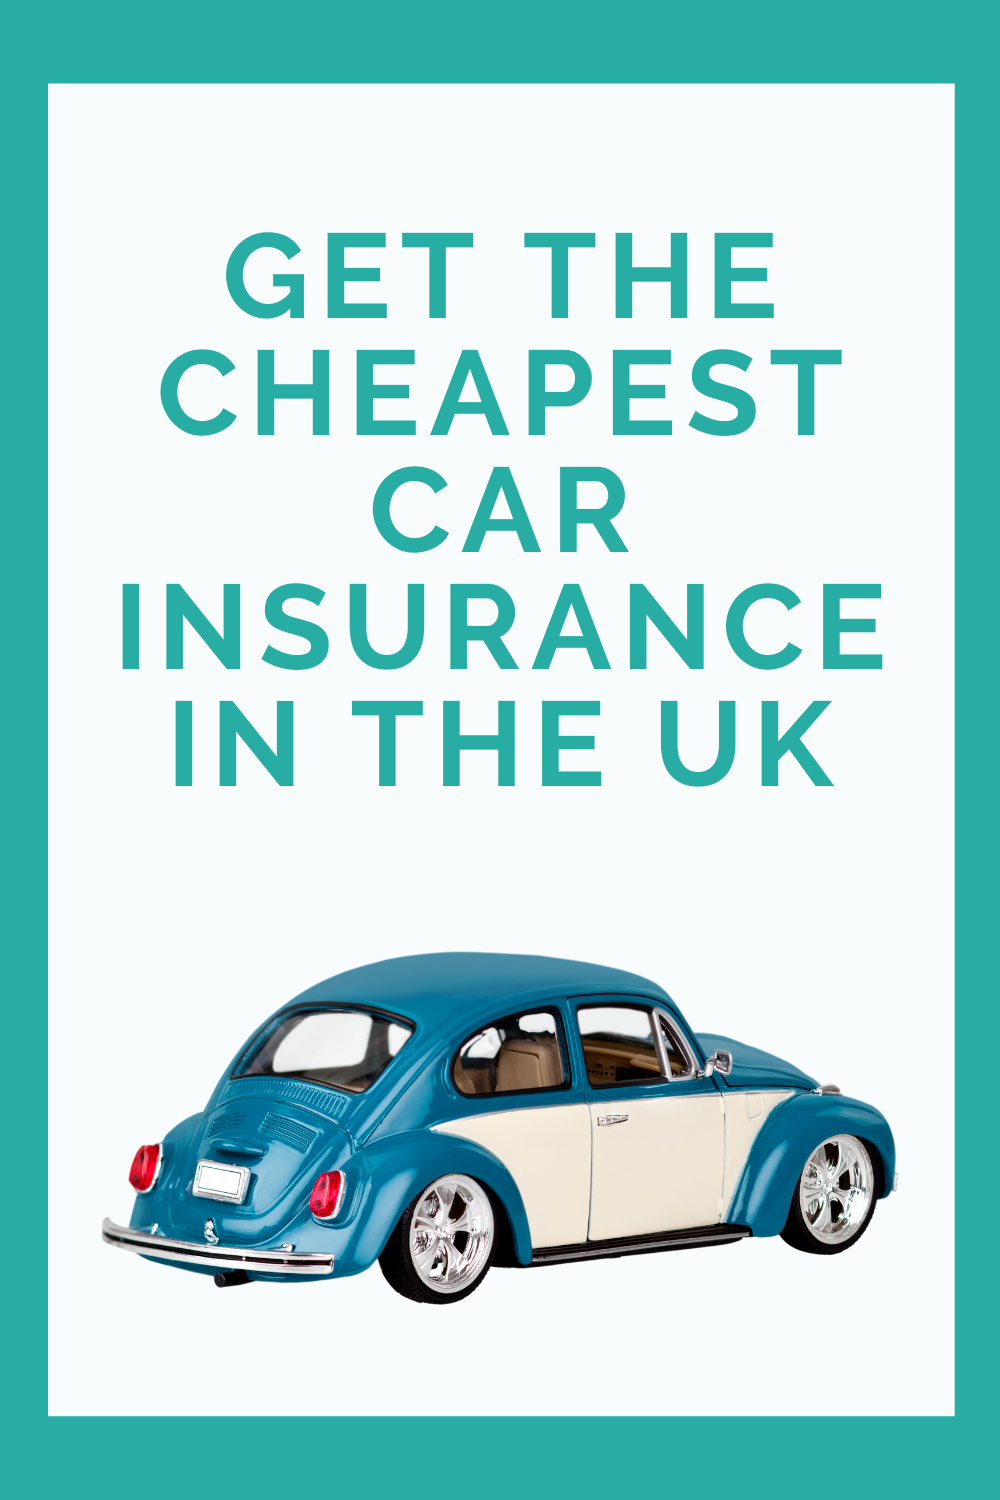 How To Calculate Insurance For Car